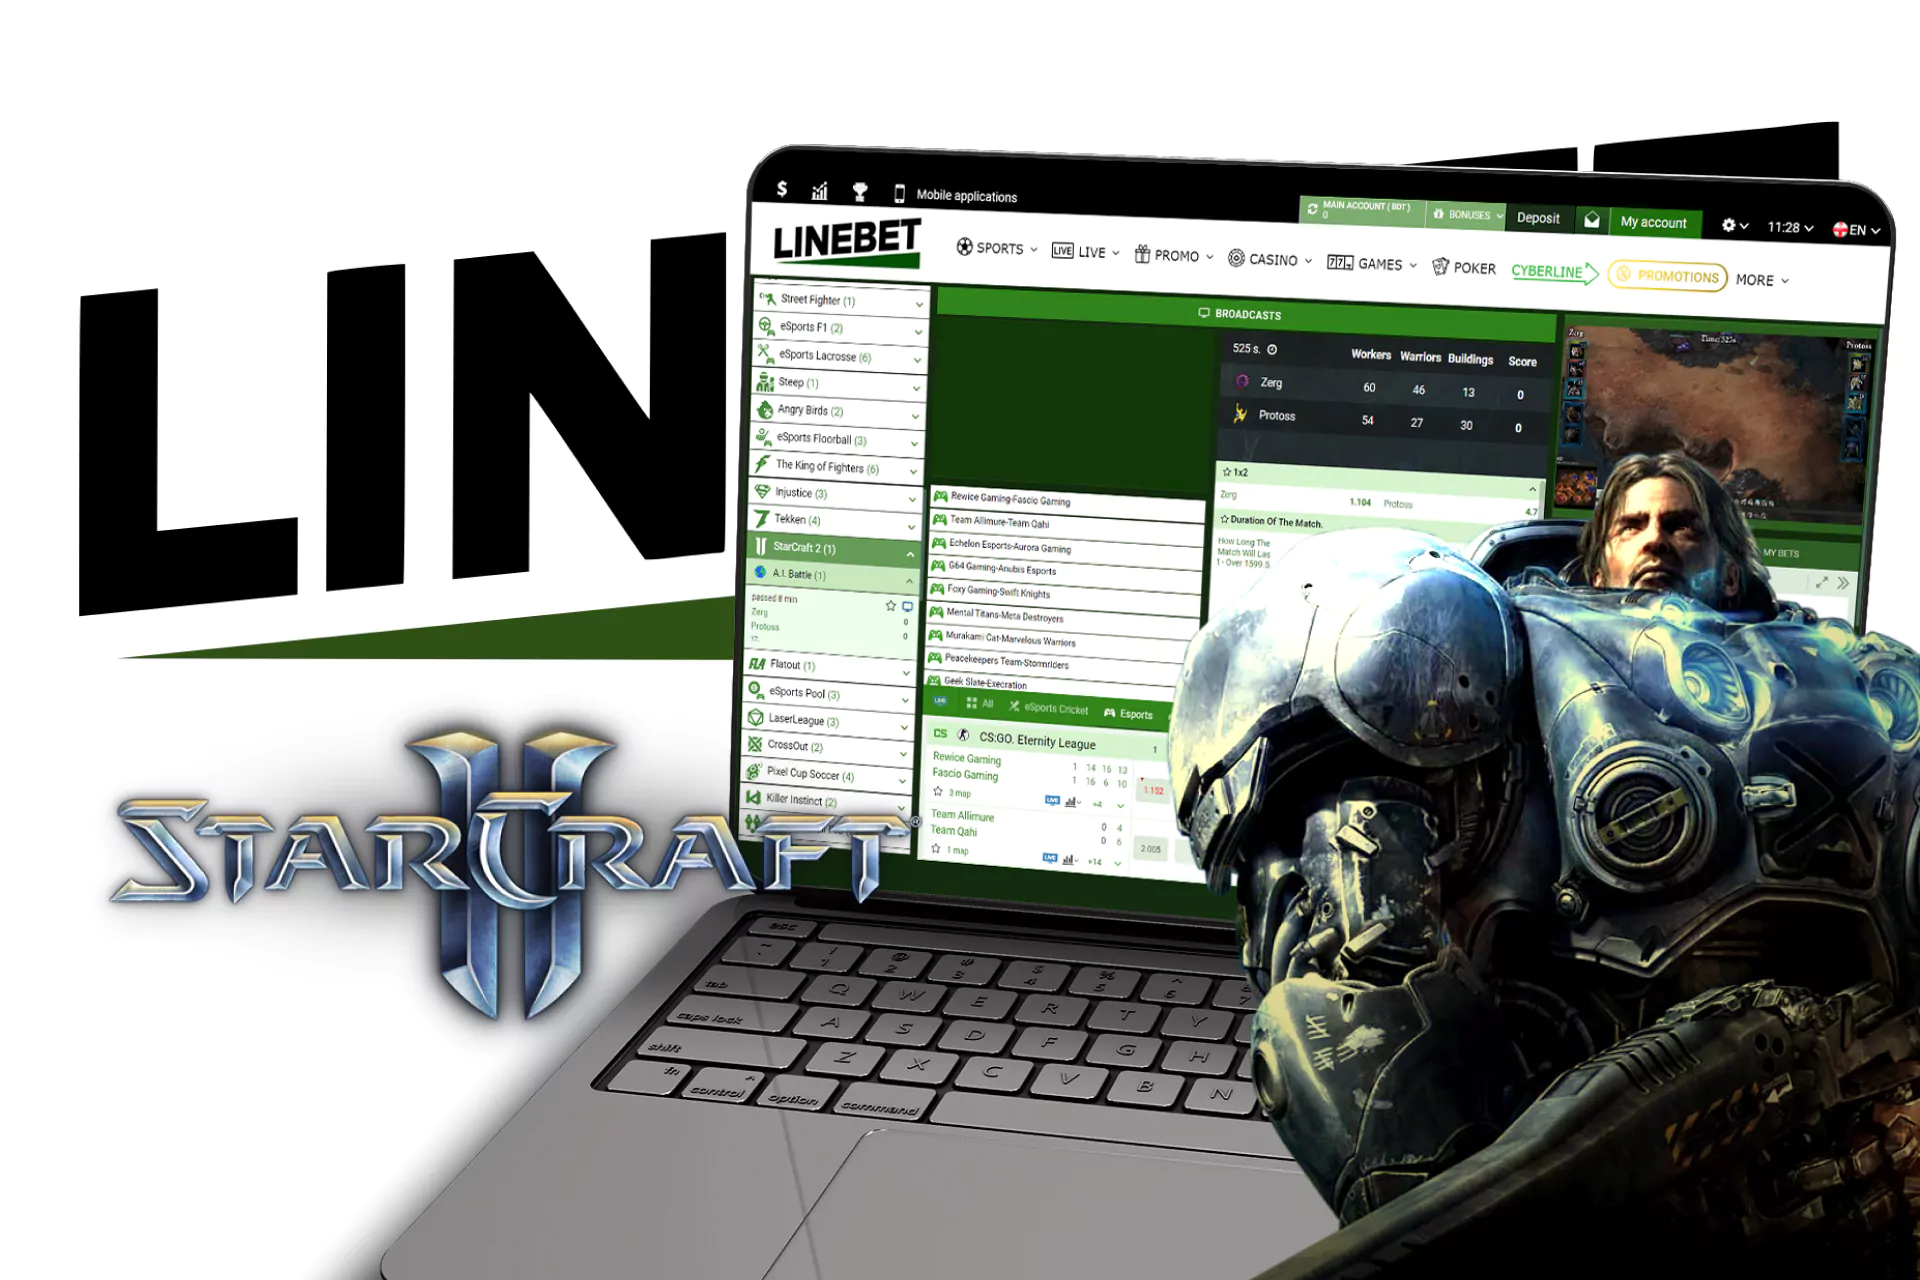 To start betting on StarCraft 2 from Linebet, follow the steps below.